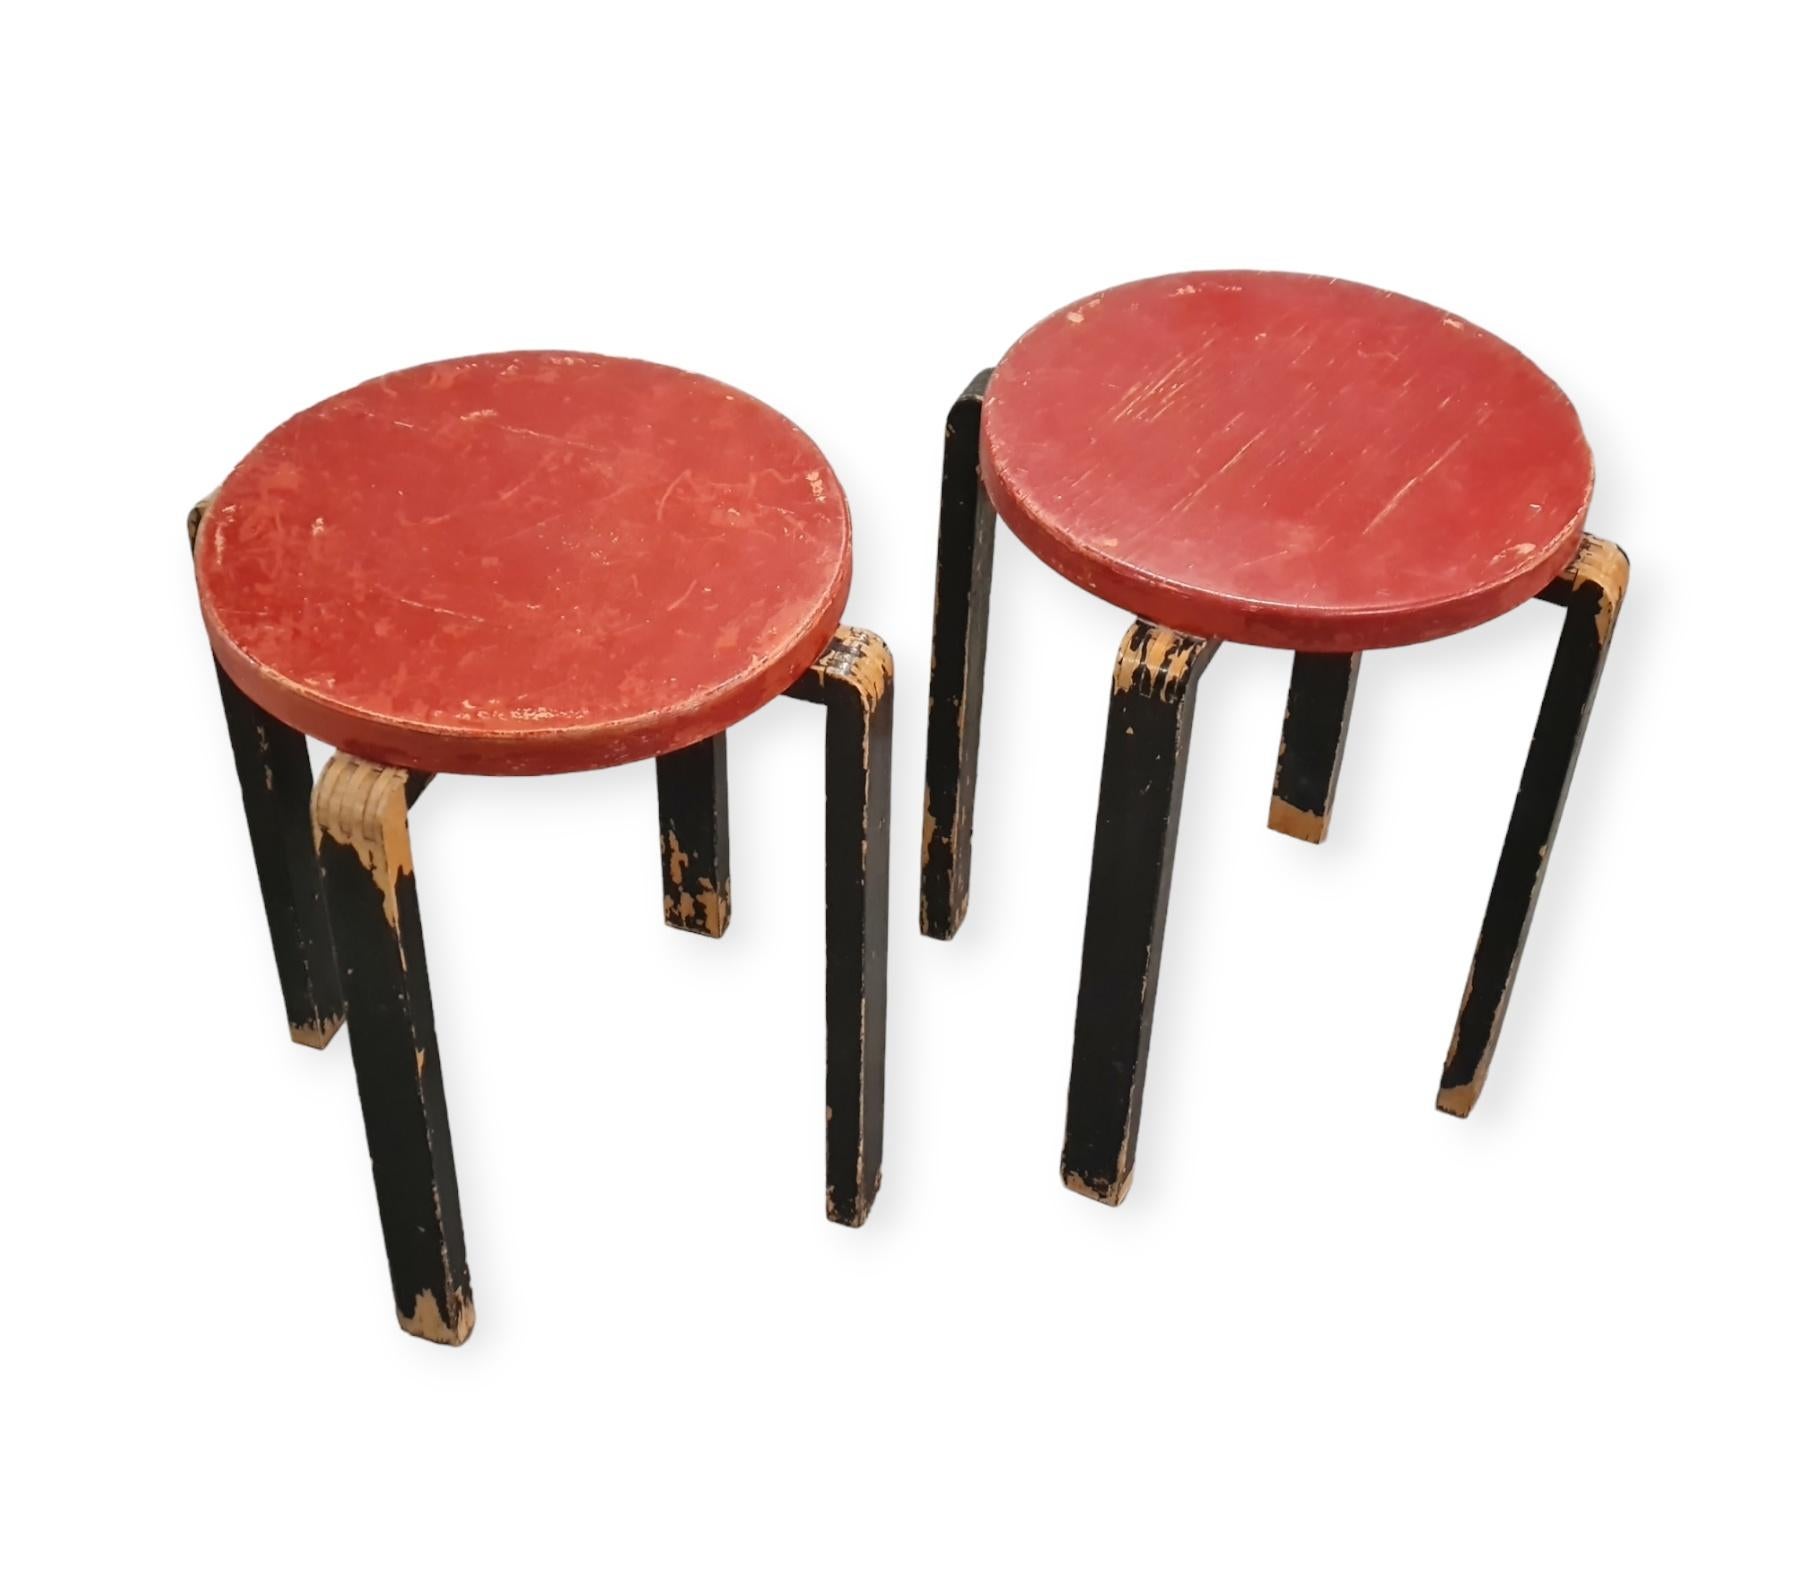 Alvar Aalto war-time stools are extremely sought after collectibles for the simple reason that not many of them are available any more.
A war-time stool can be easily distinguished by the way the legs are bent, or actually in this case joint